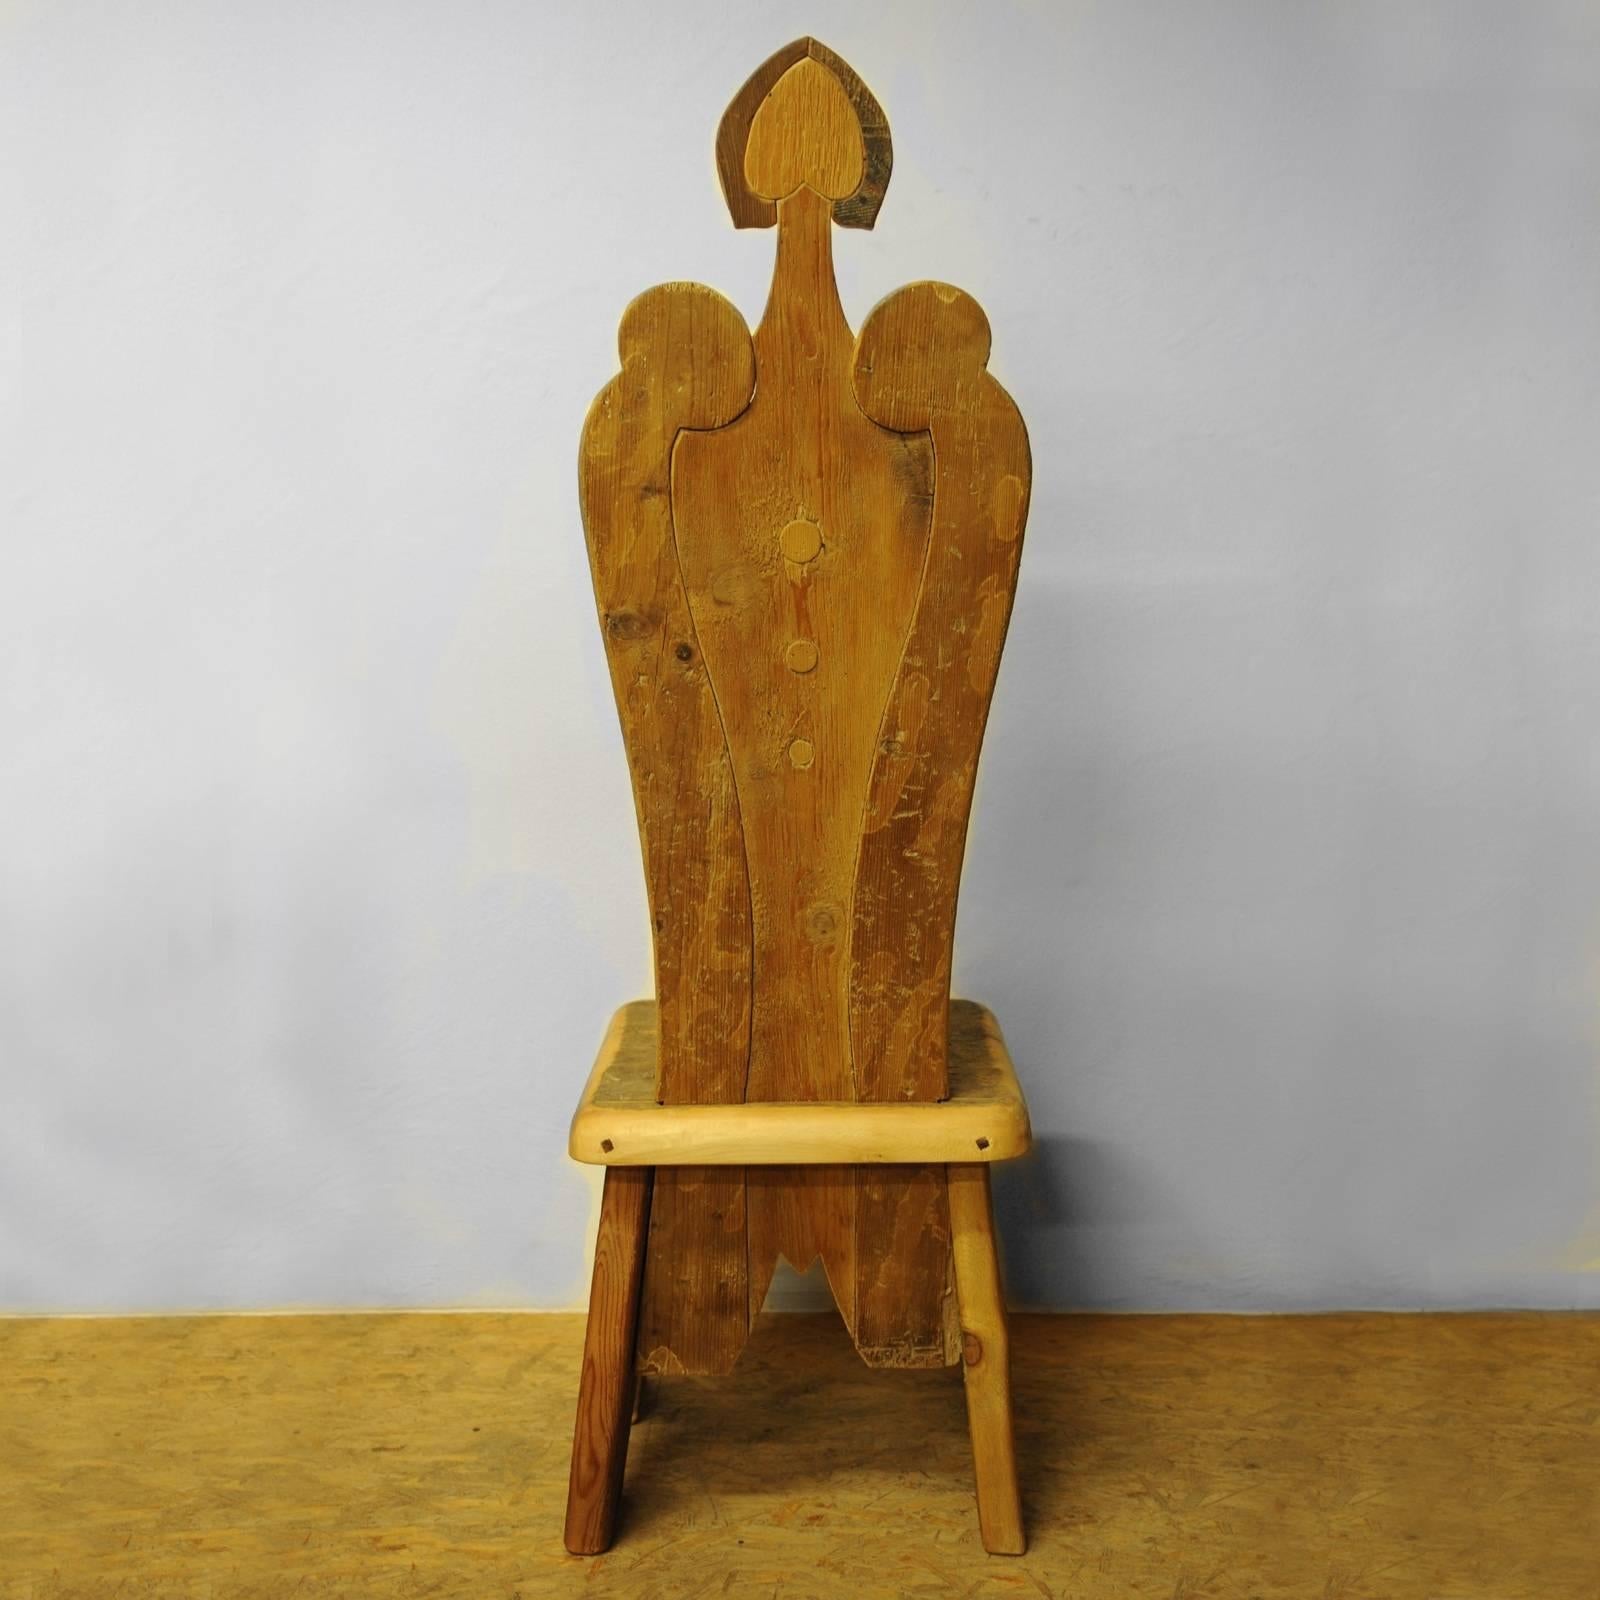 A stunning ode to reclaimed wood and tradition, this exquisite chair is one of 20 designs part of the Throne collection. The unique silhouette of this piece will make a statement in a rustic or modern living room, bedroom, or entryway, or -